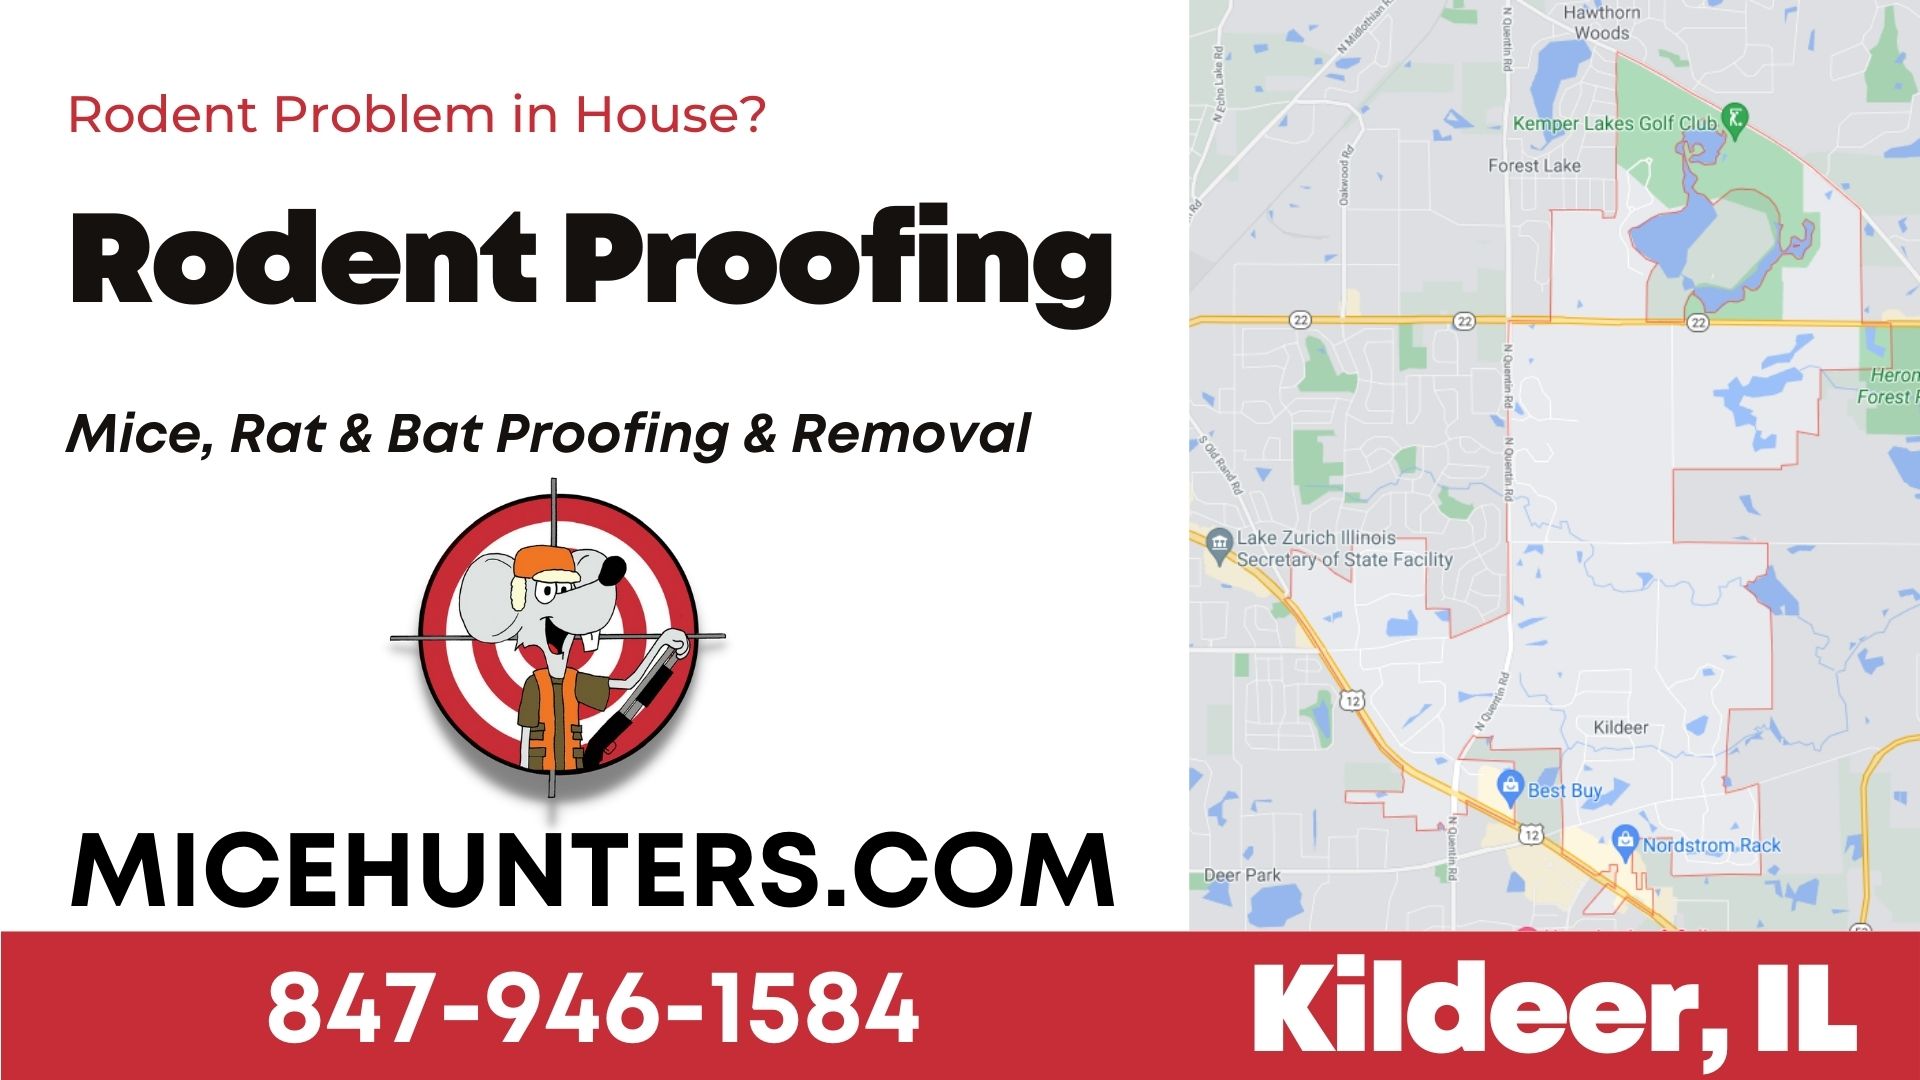 Kildeer,IL Rodent and Mice Proofing Exterminator